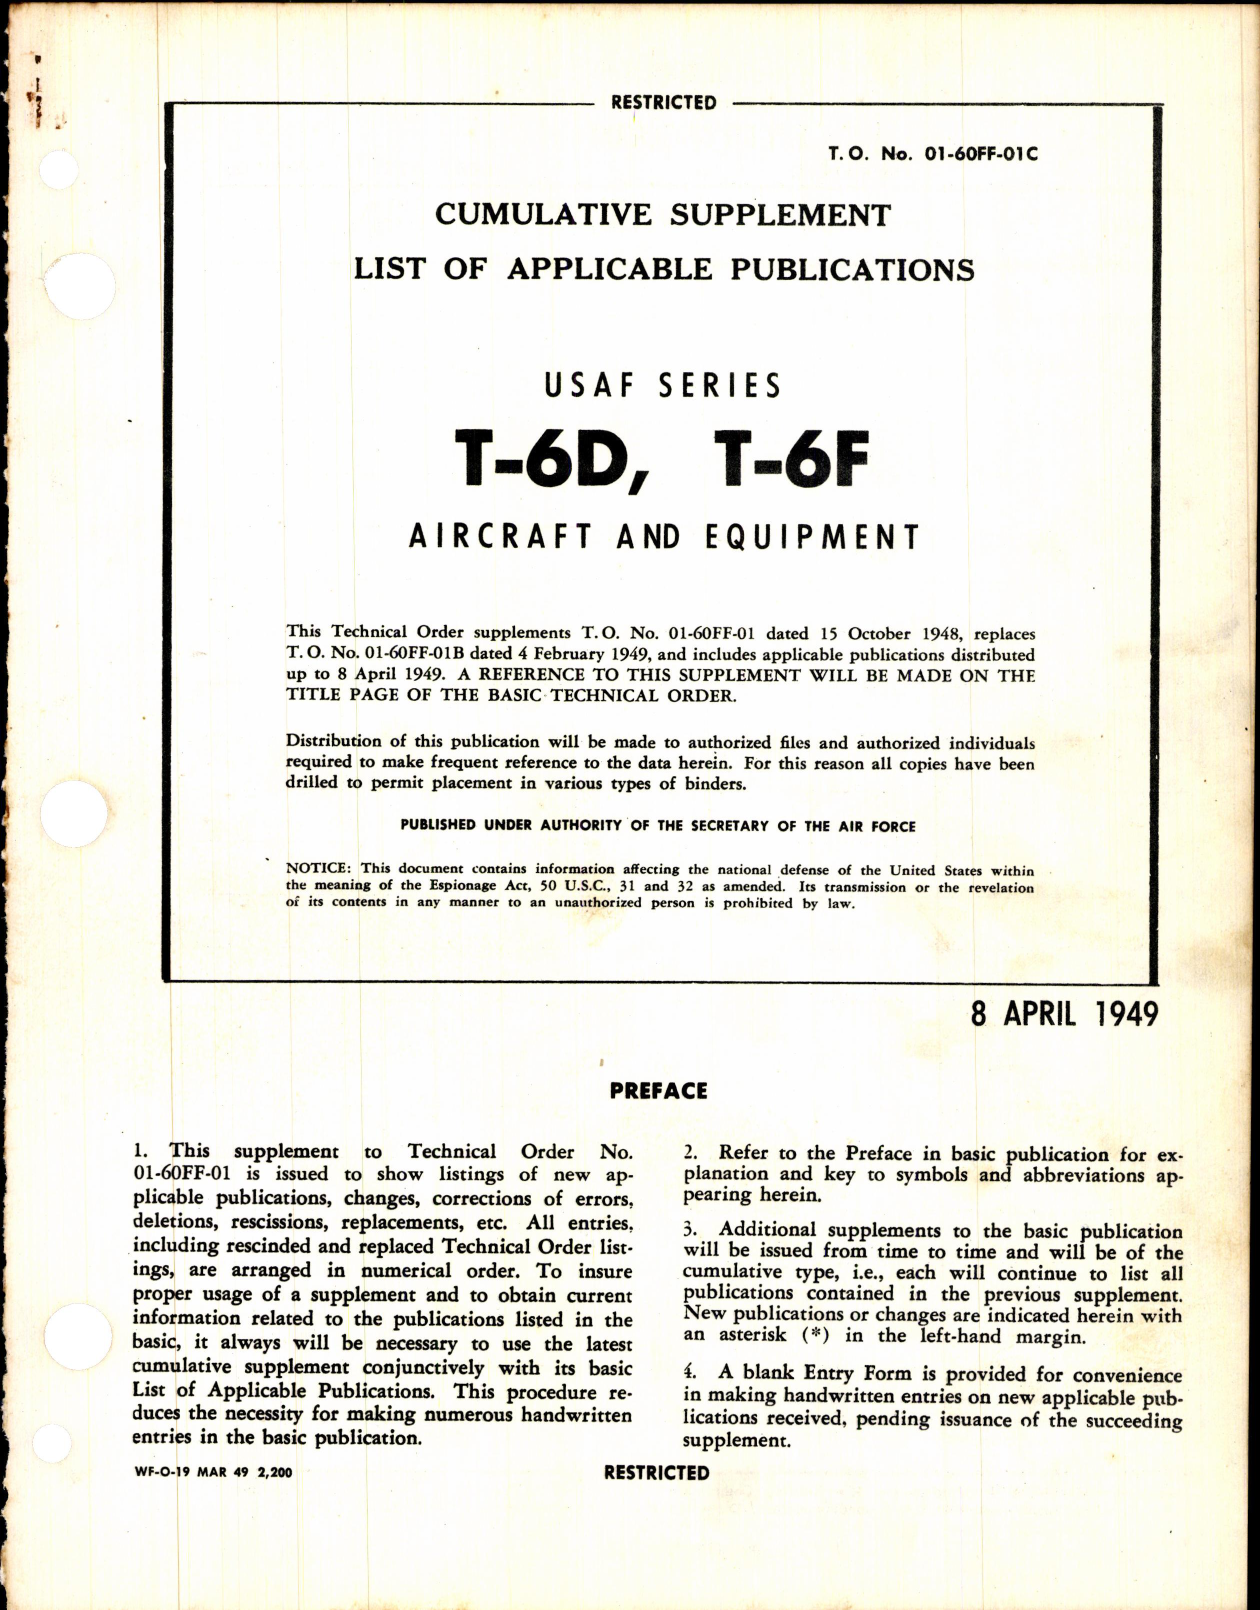 Sample page 1 from AirCorps Library document: Cumulative Supplement List of Applicable Publications for T-6